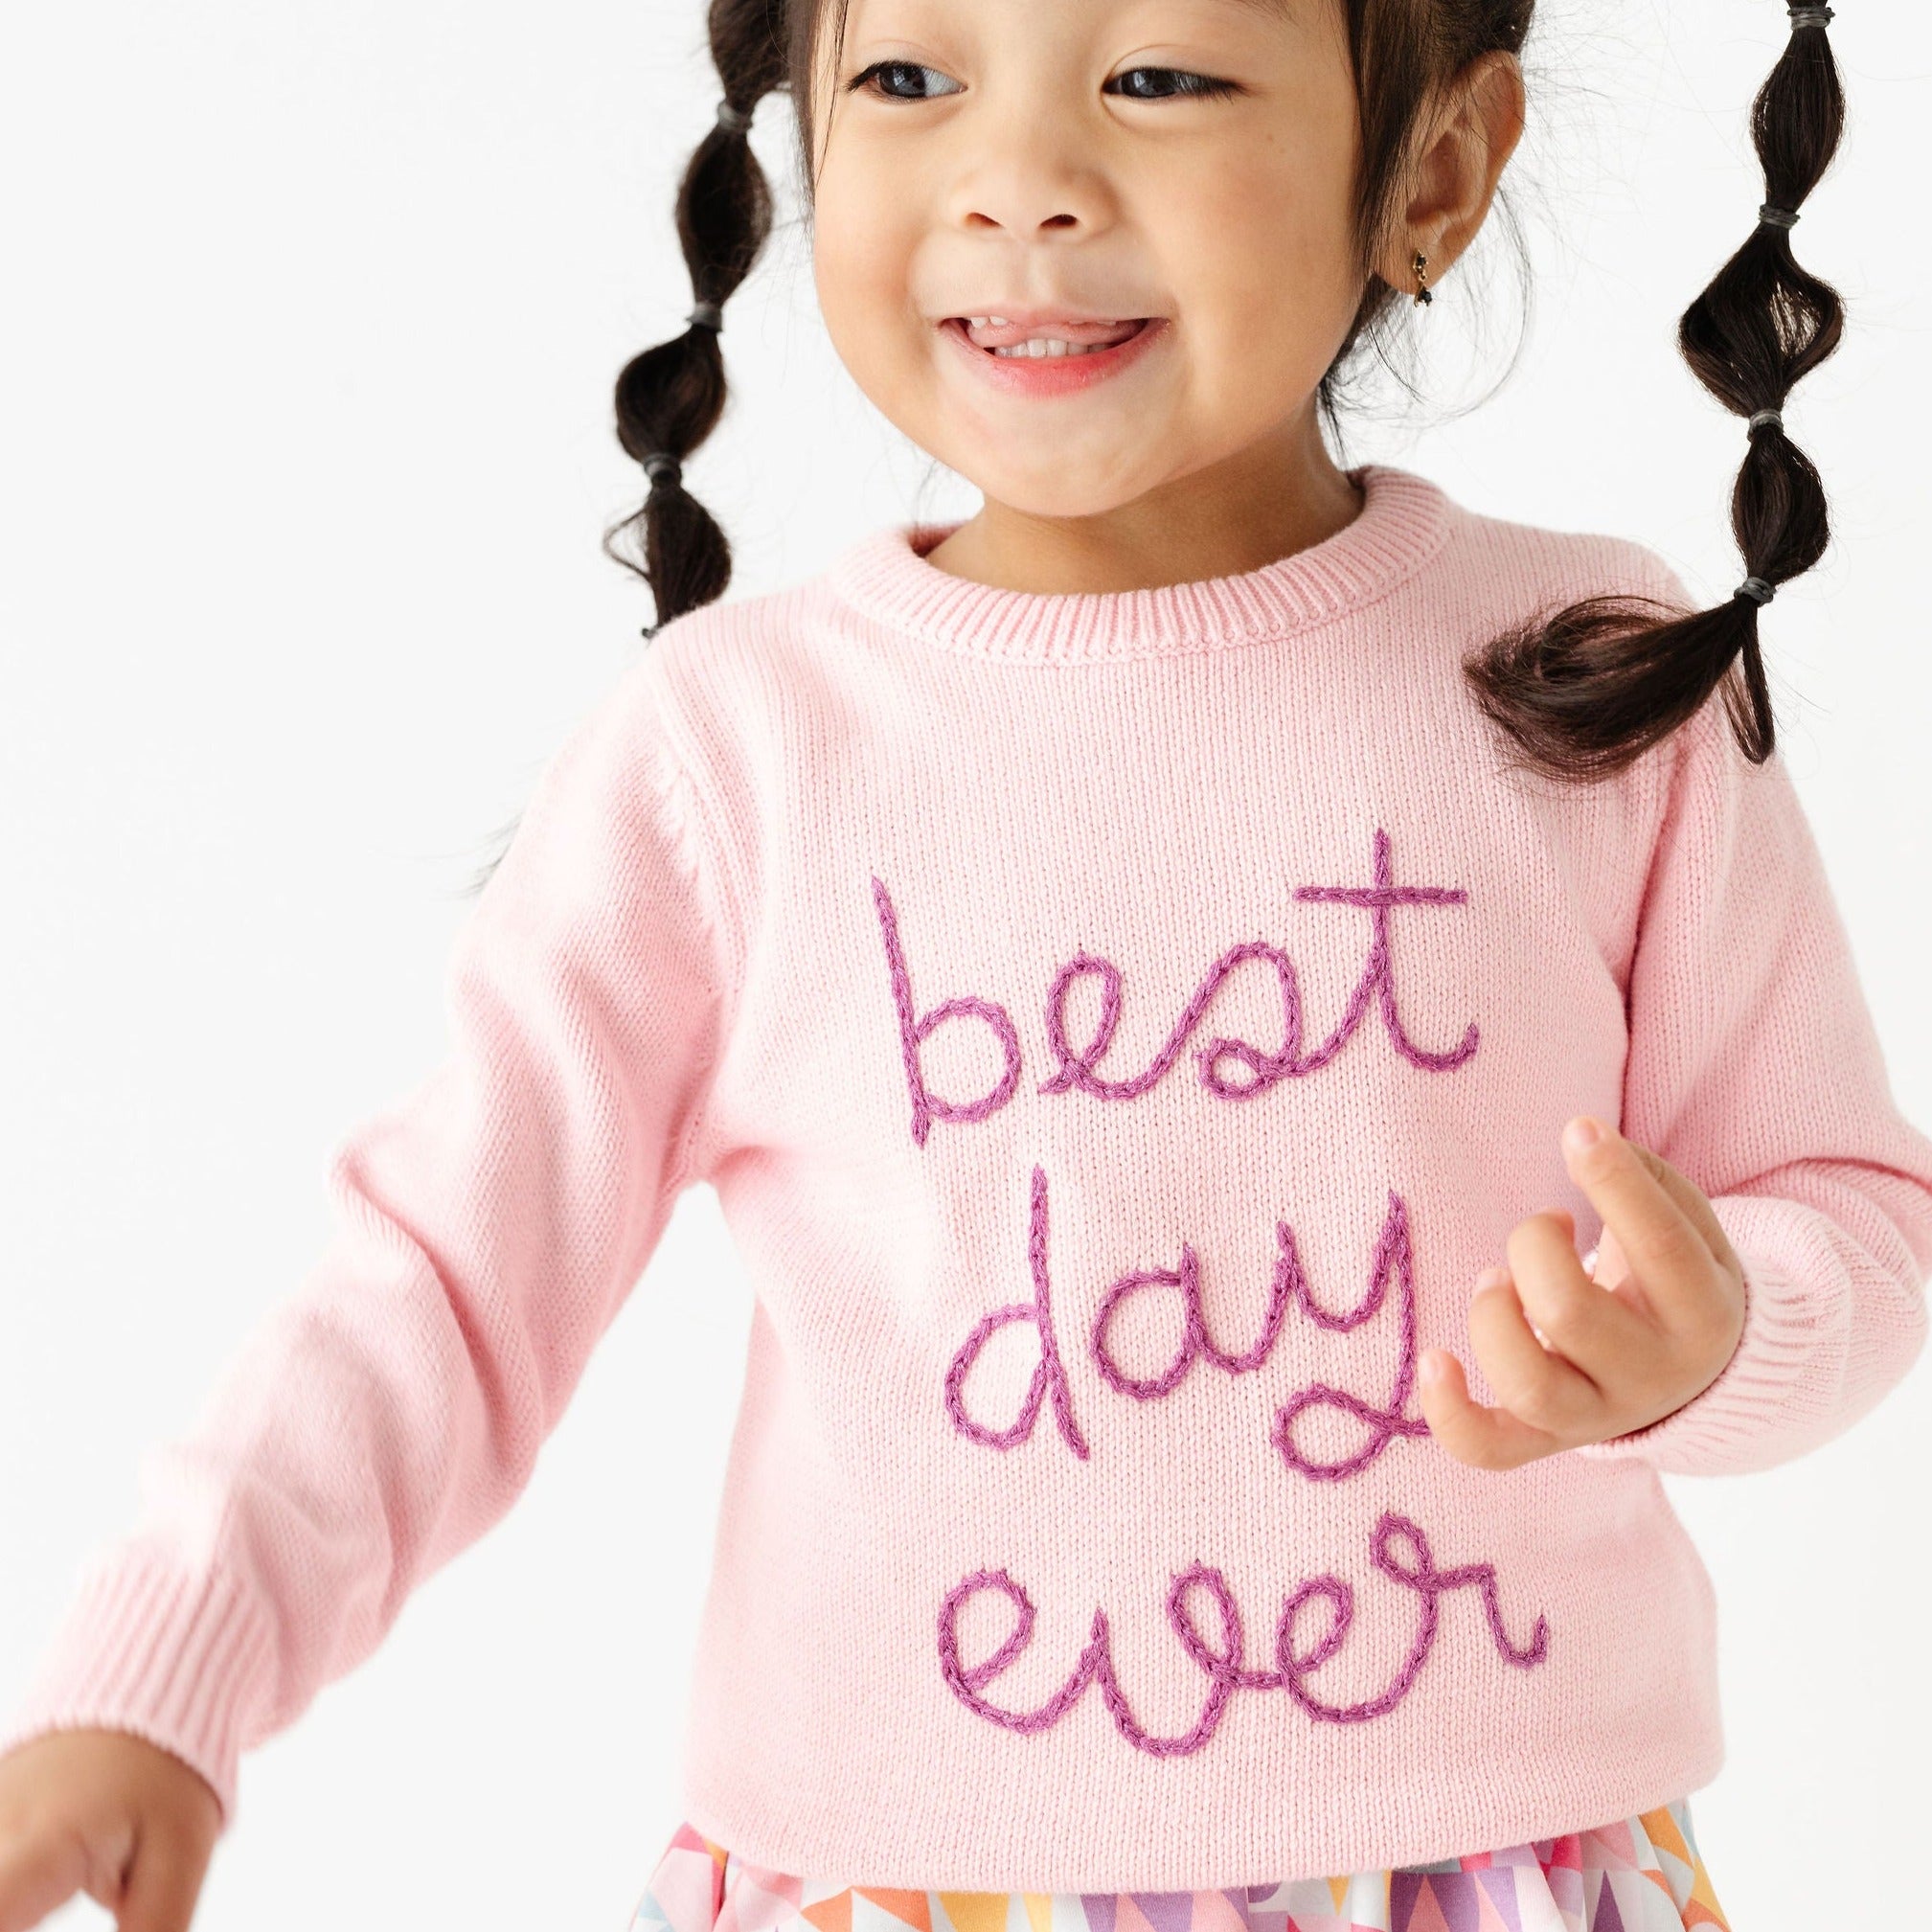 little girl wearing pink sweater with embroidered 